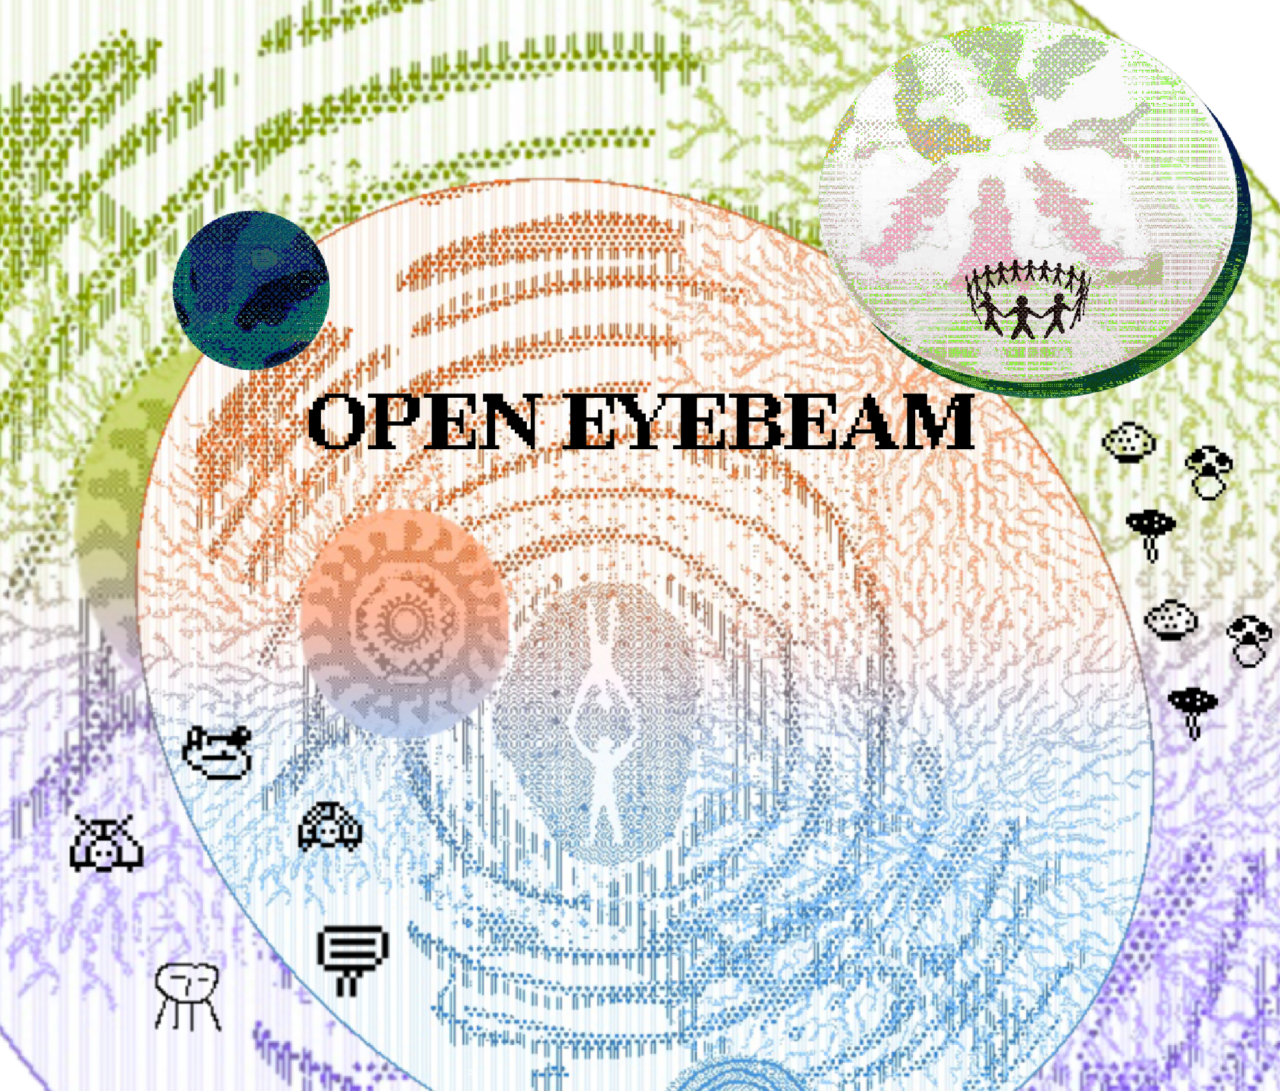 An image with the text Open Eyebeam and graphics of shells, spirals, mushrooms and people holding hands in the background.